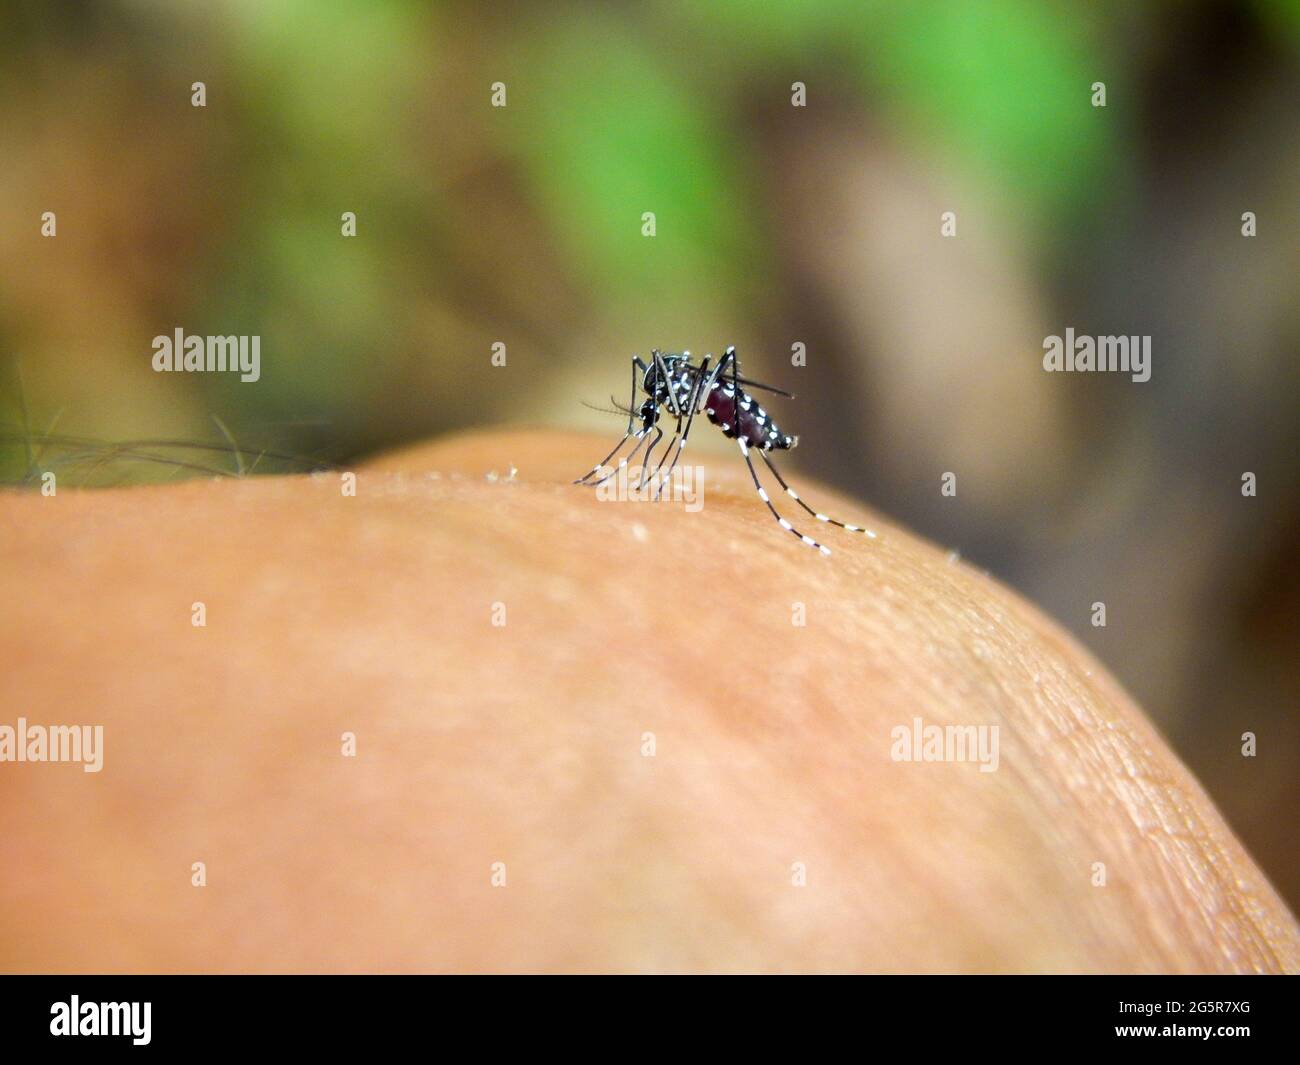 Aedes aegypti, the yellow fever mosquito biting on a man Stock Photo